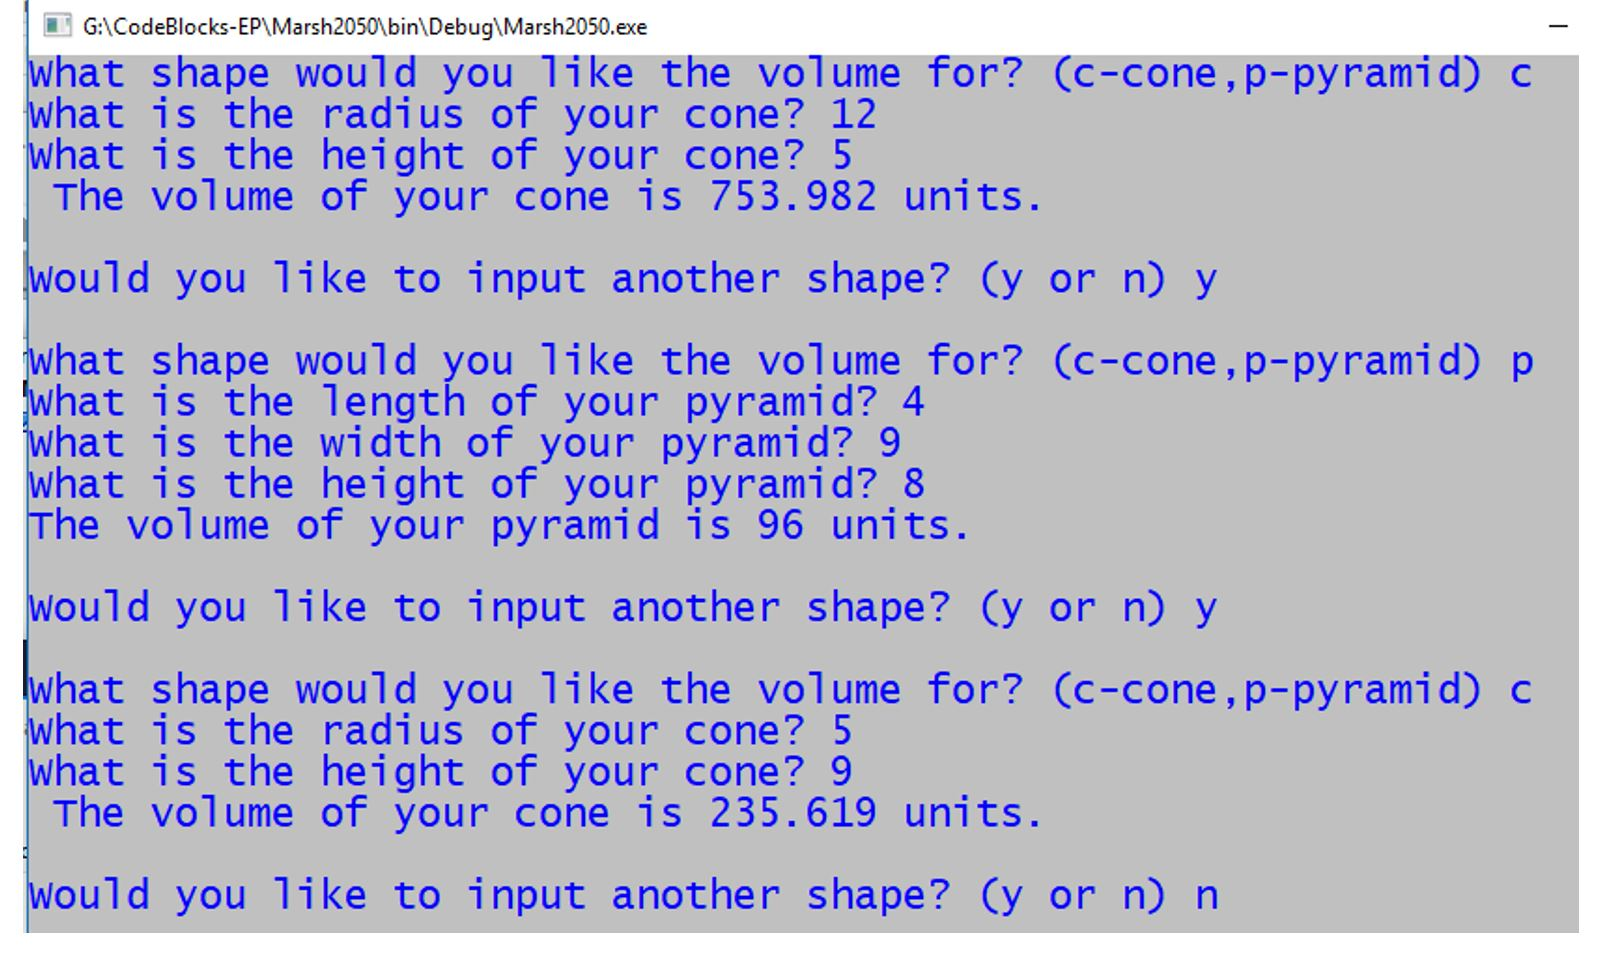 I G:CodeBlocks-EPMarsh2050binDebugMarsh2050.exe What shape would you like the volume for? (c-cone, p-pyramid) C what is